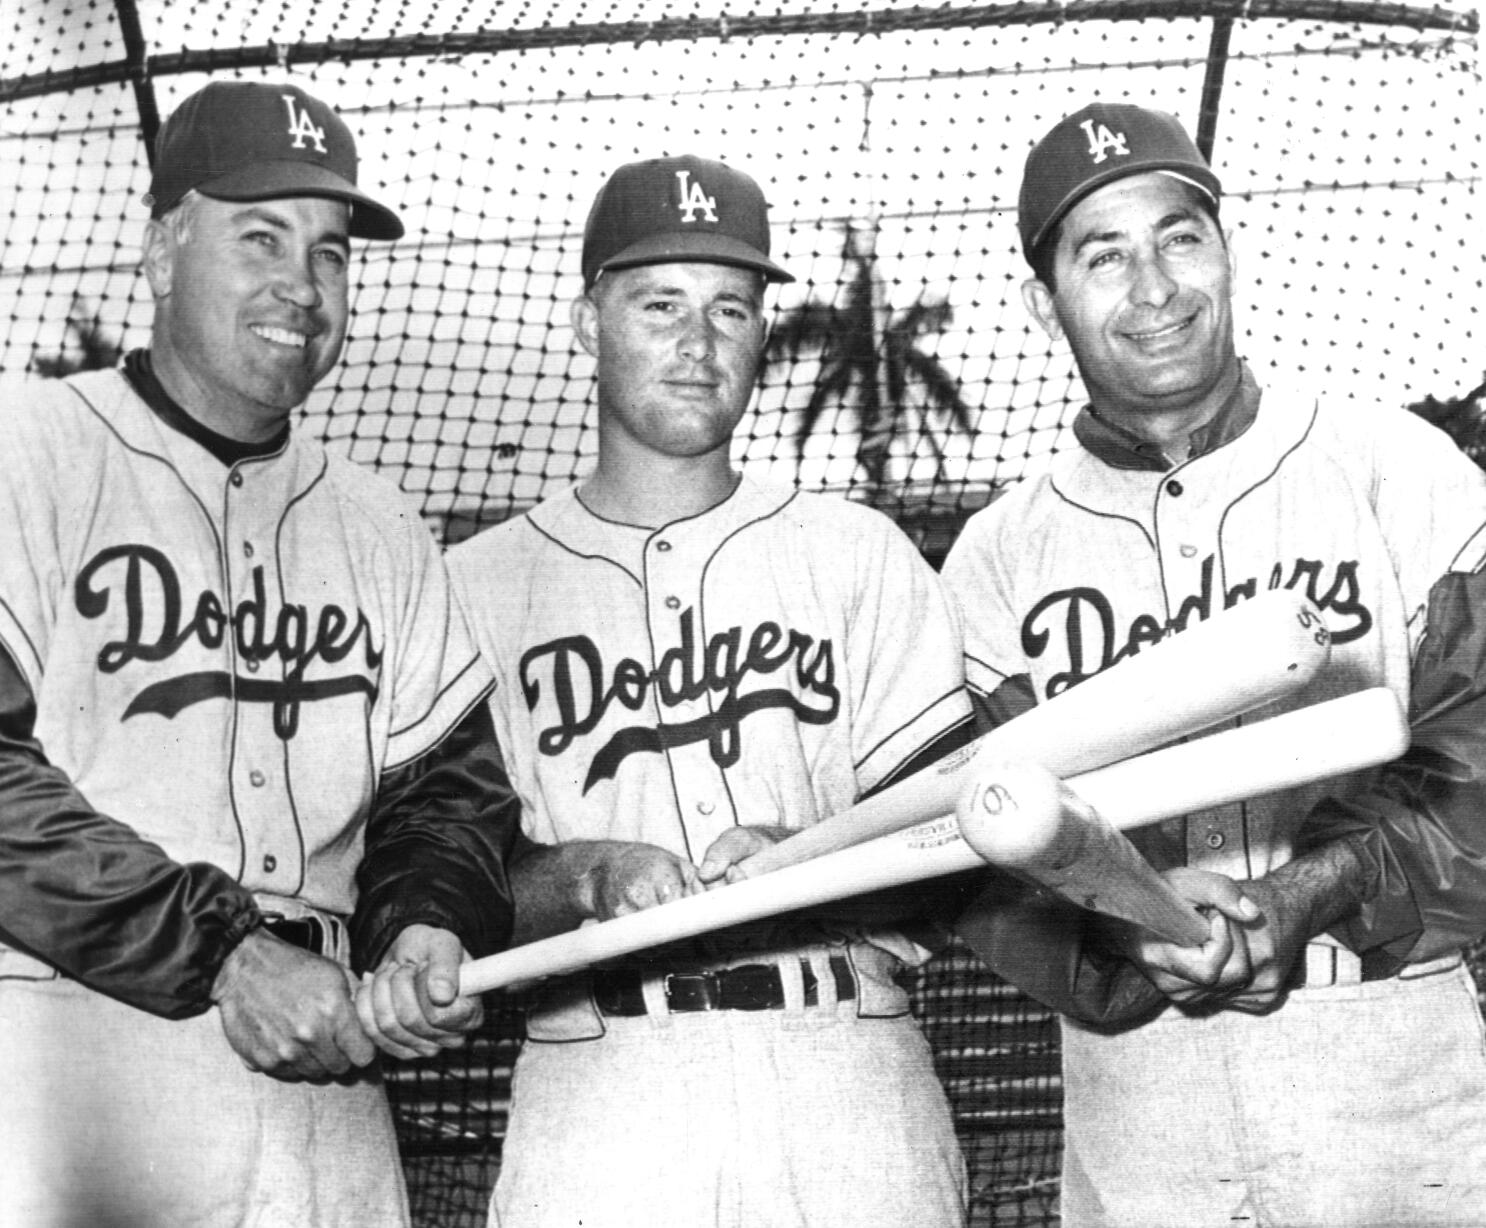 Ron Fairly, Dodger Star Turned Broadcaster, Dies at 81 - The New